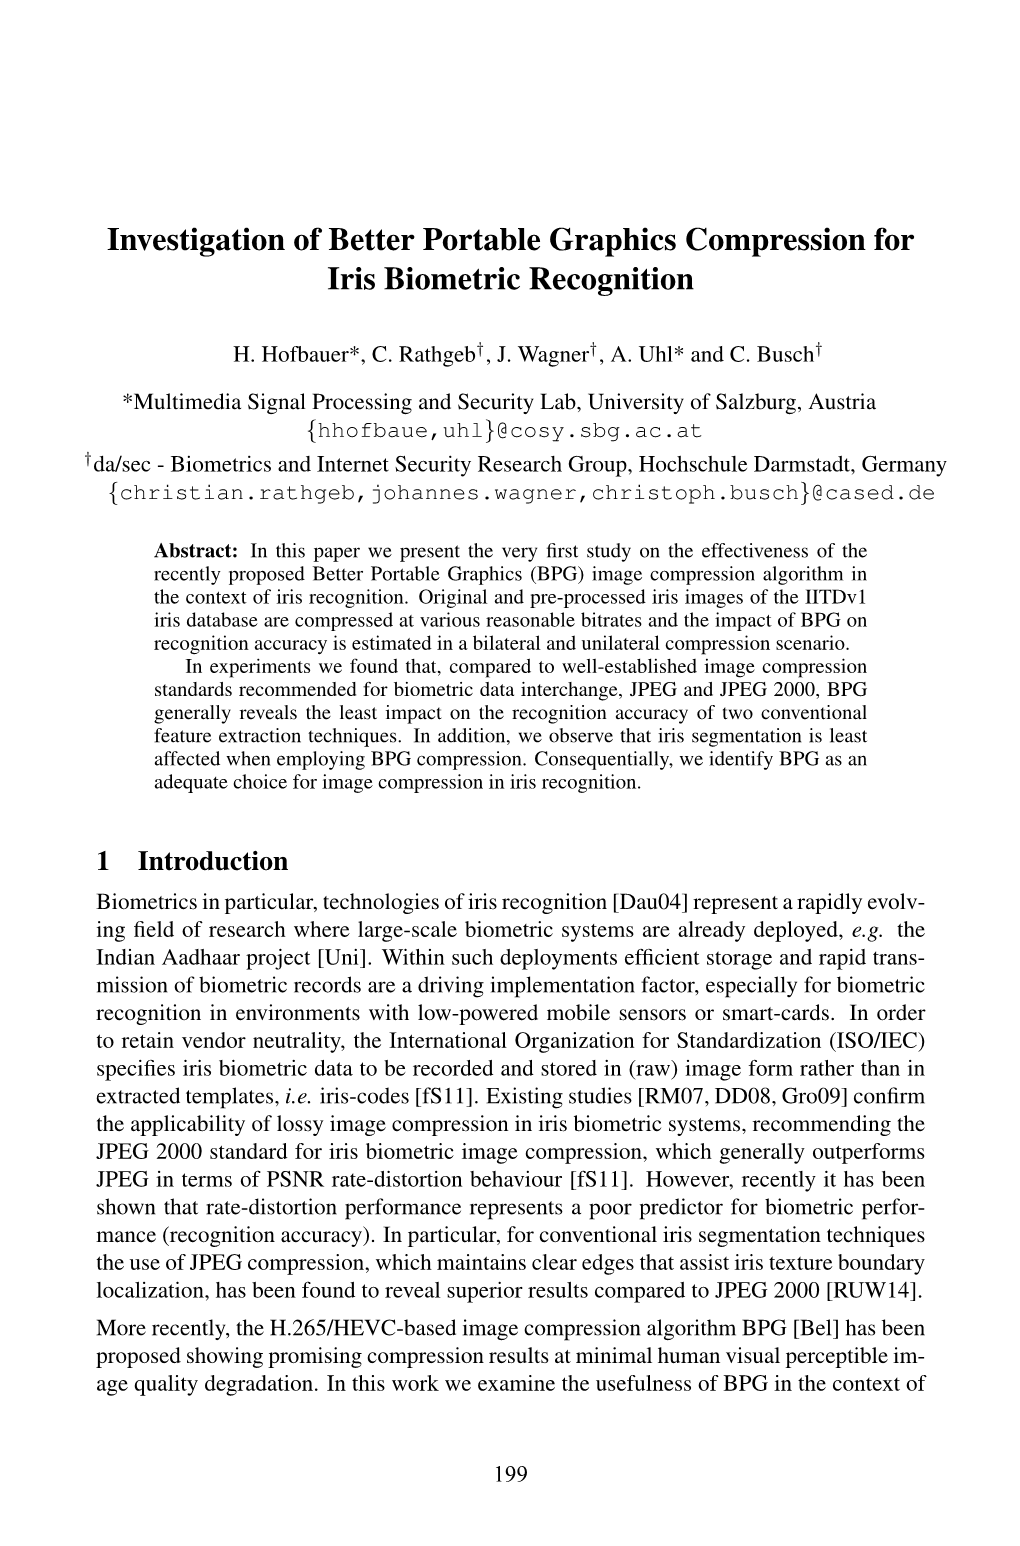 Investigation of Better Portable Graphics Compression for Iris Biometric Recognition